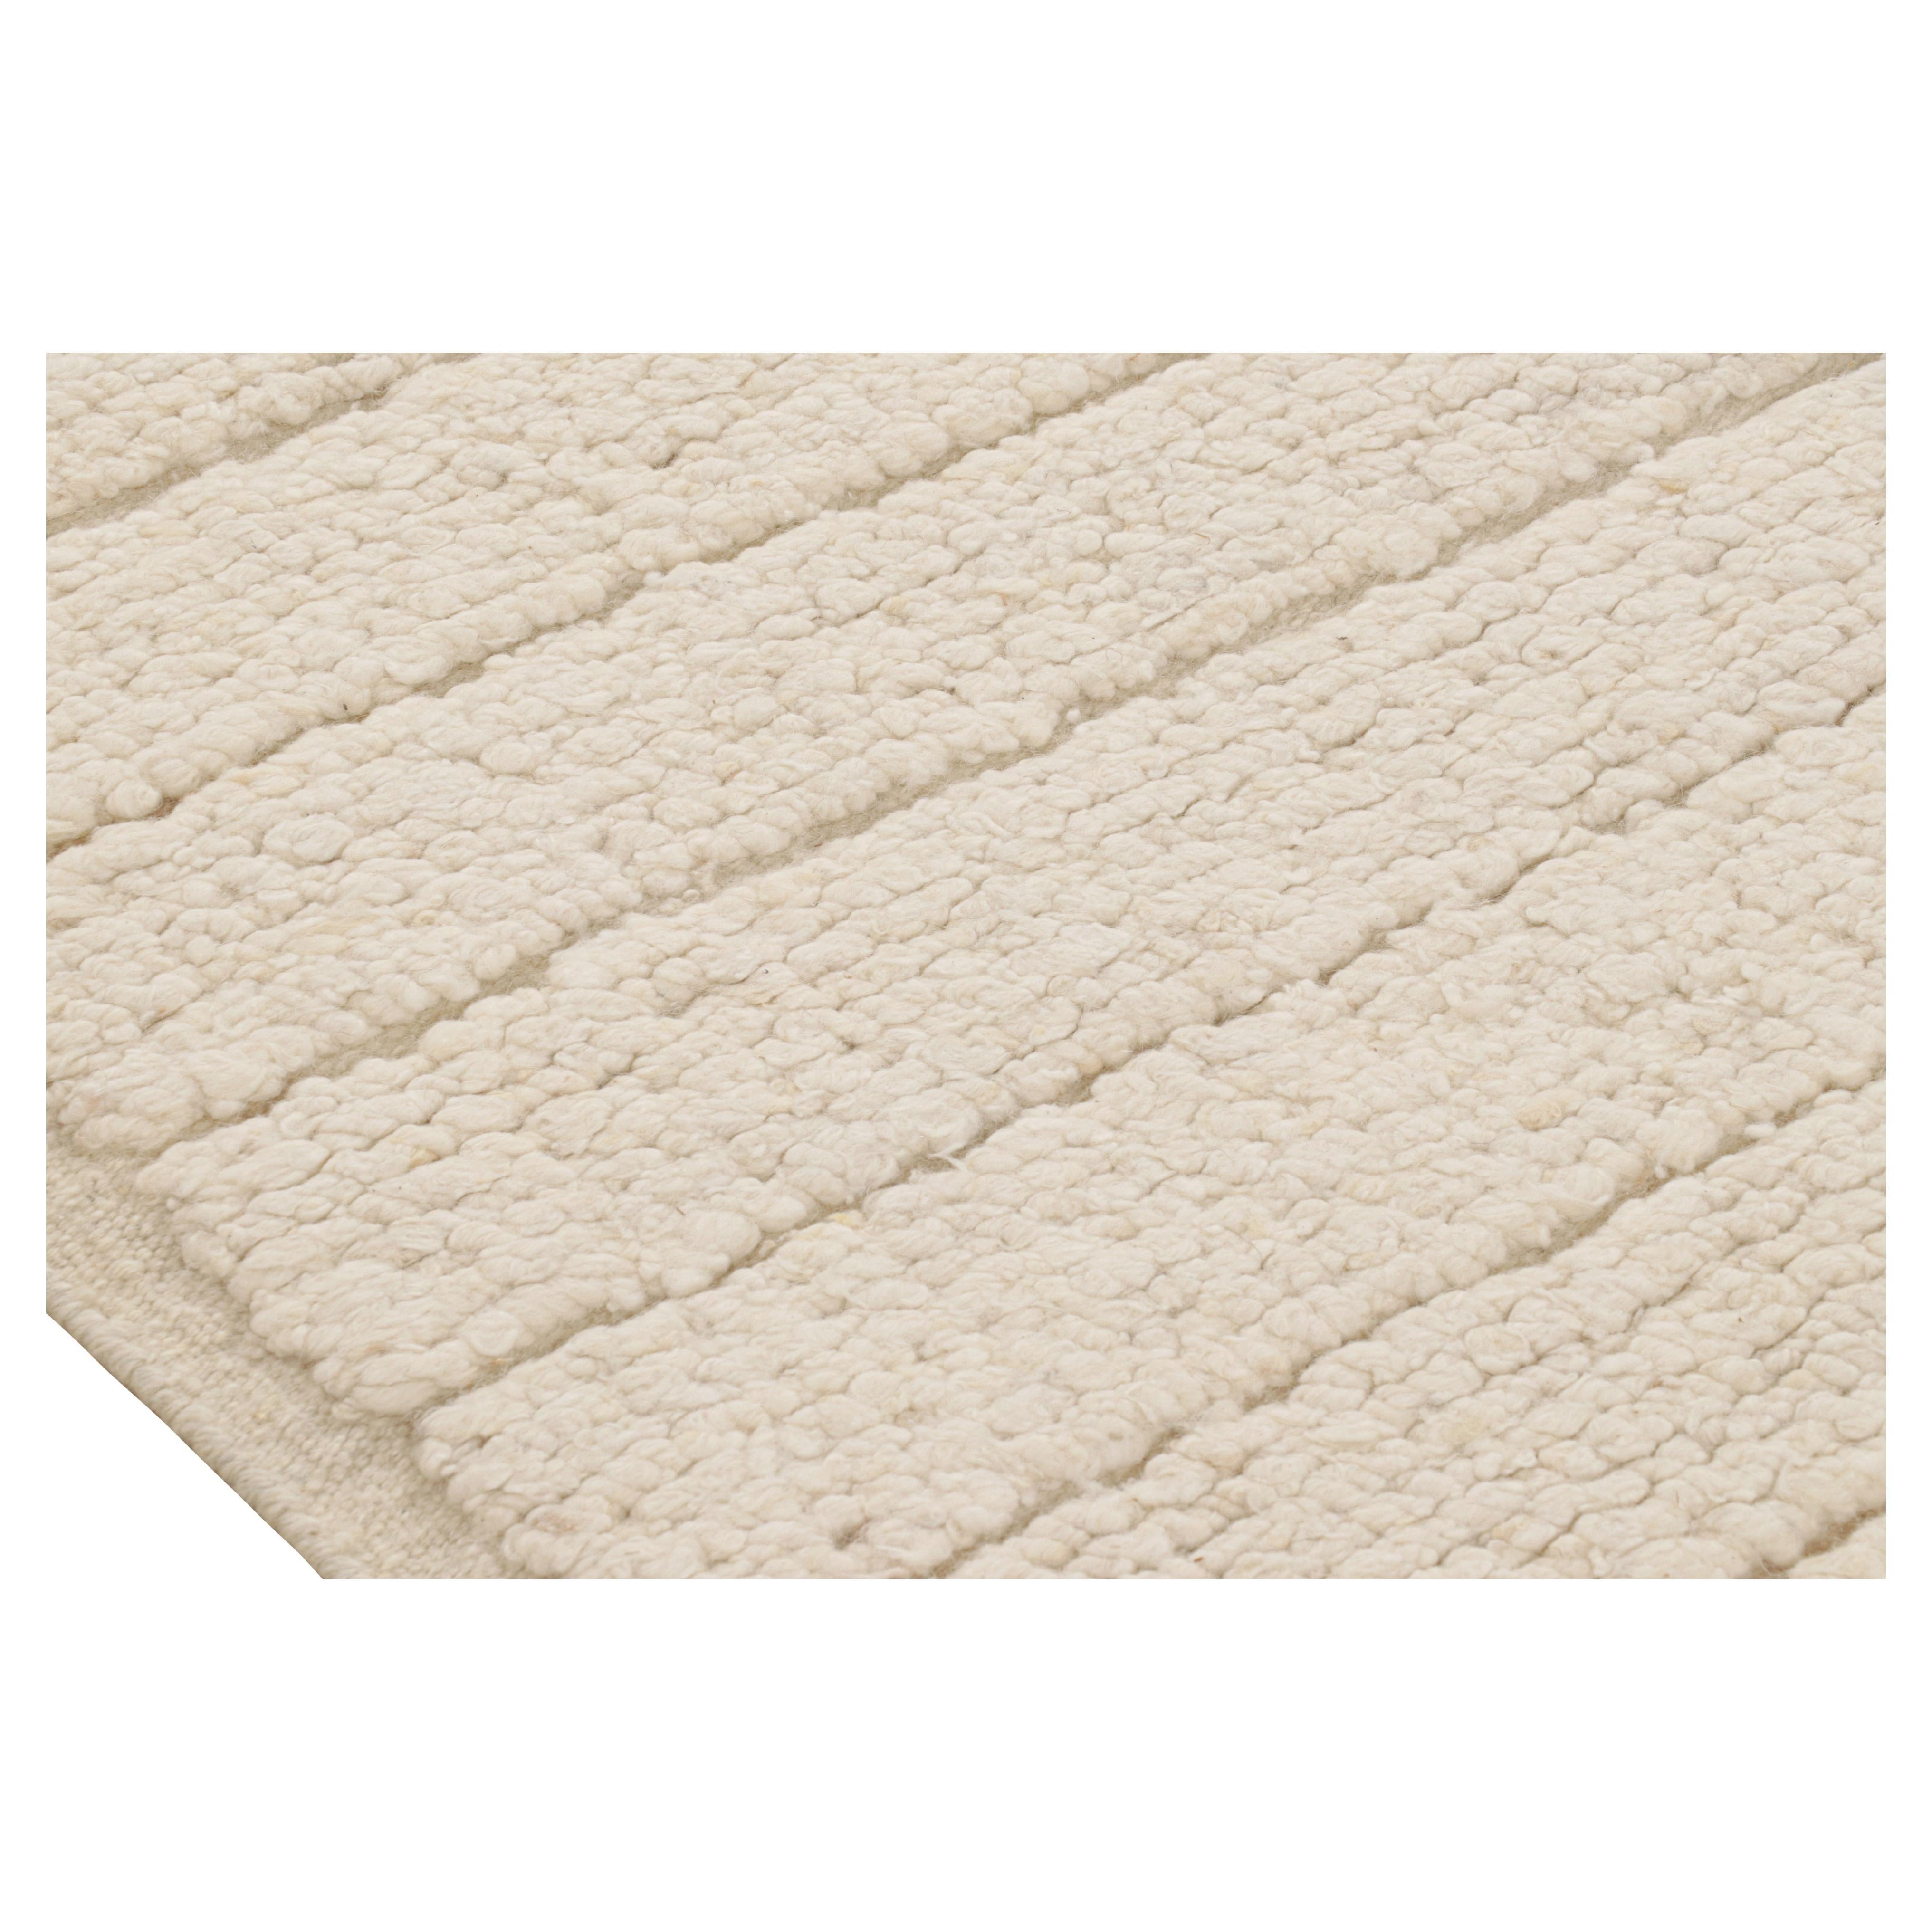 Rug & Kilim’s Textural Kilim Rug in Cream and White High-Low Stripes